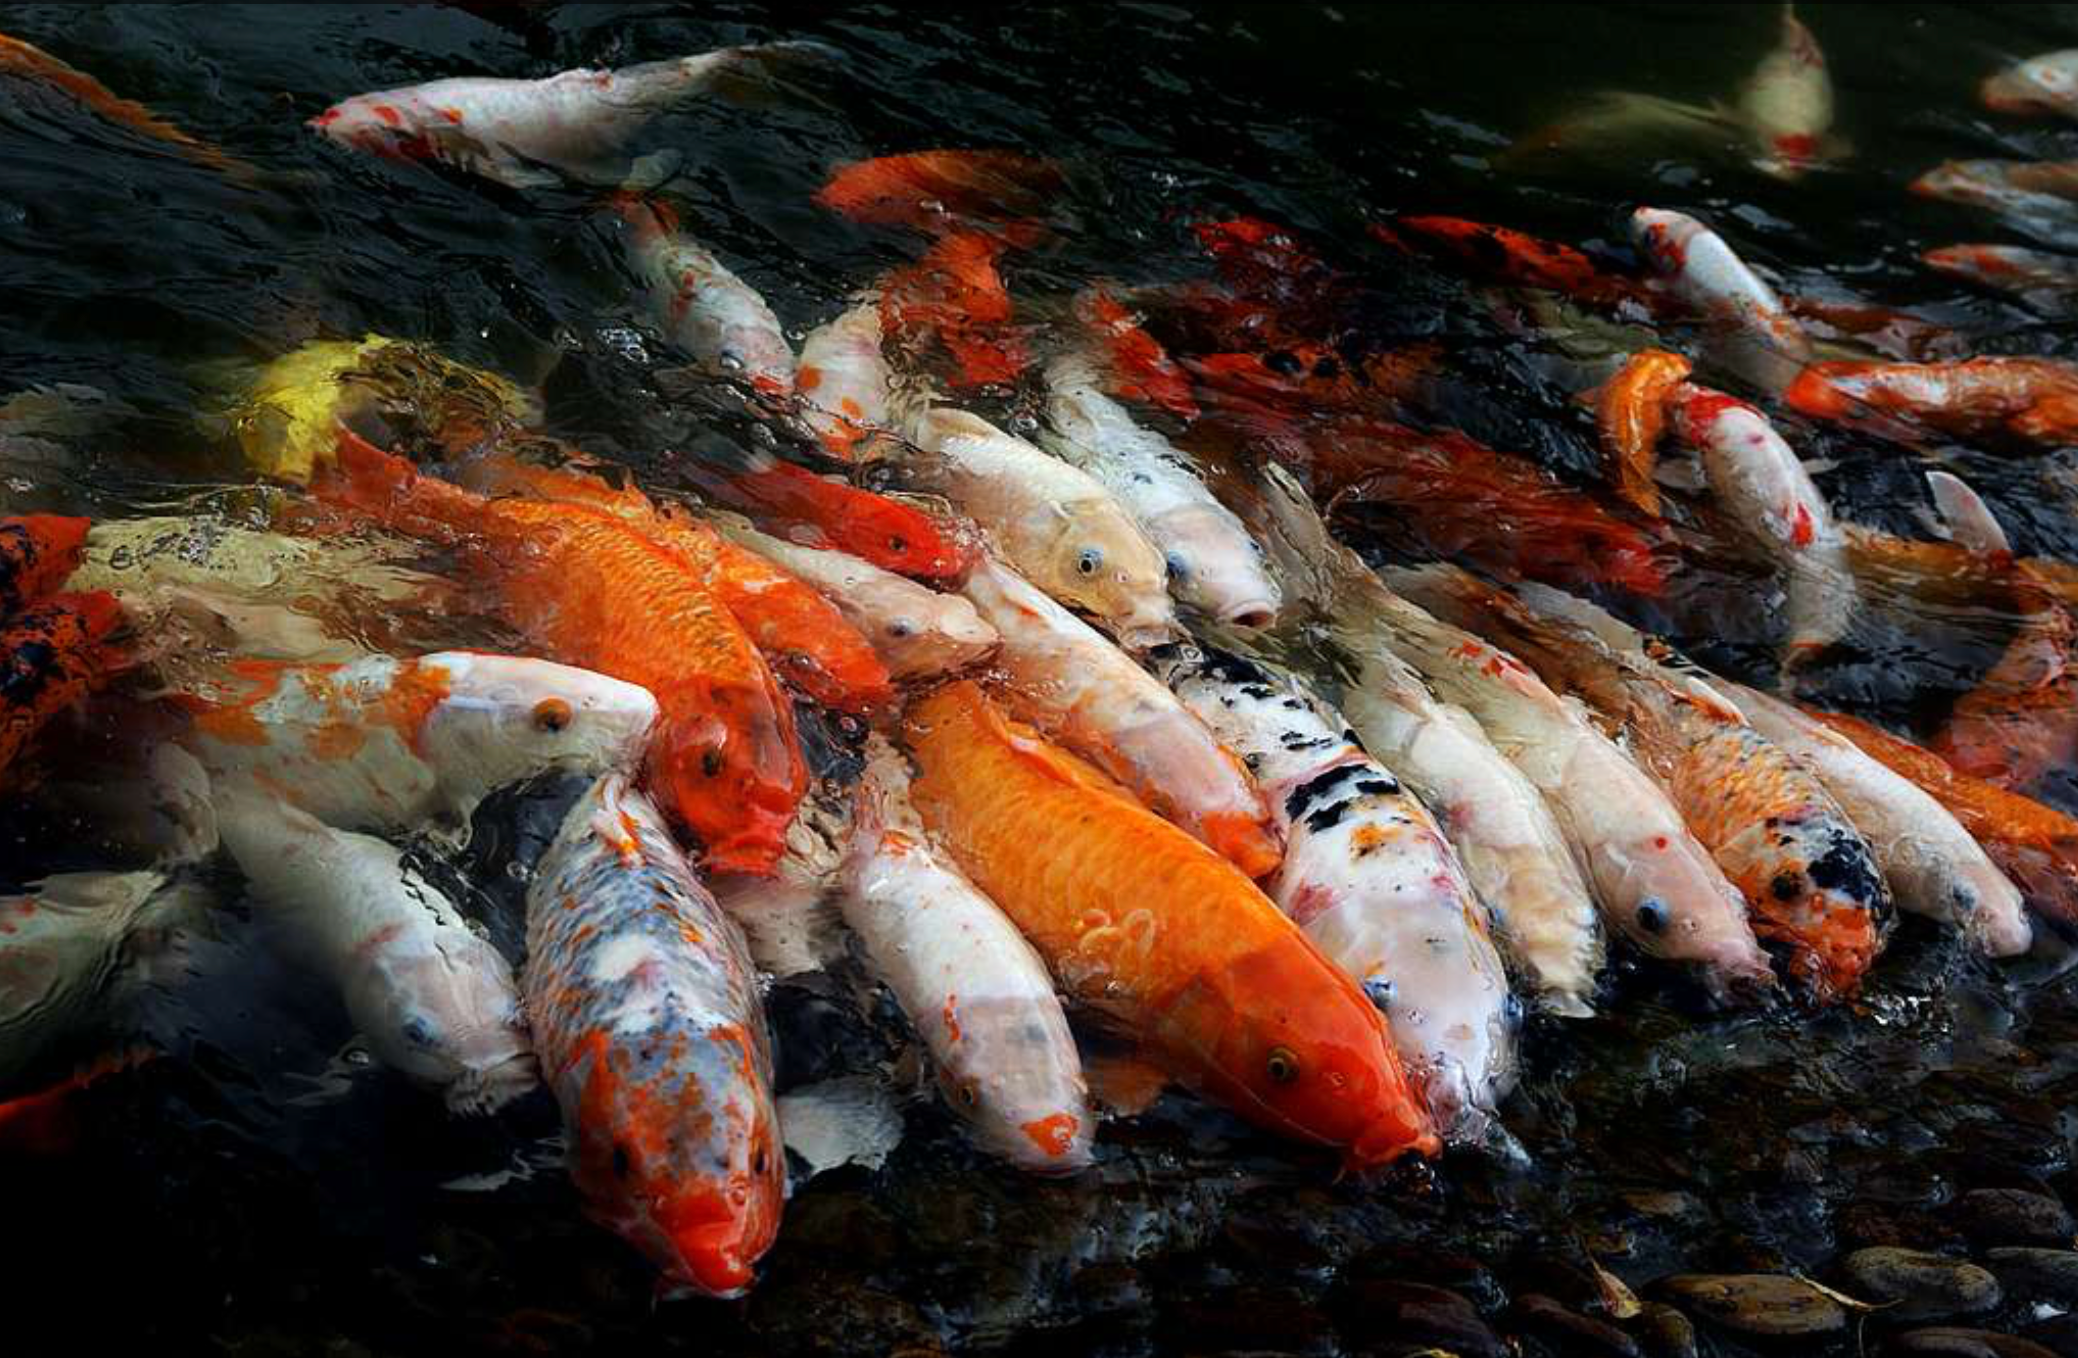 Bright orange and white koi with orange and black spots in a huddled group